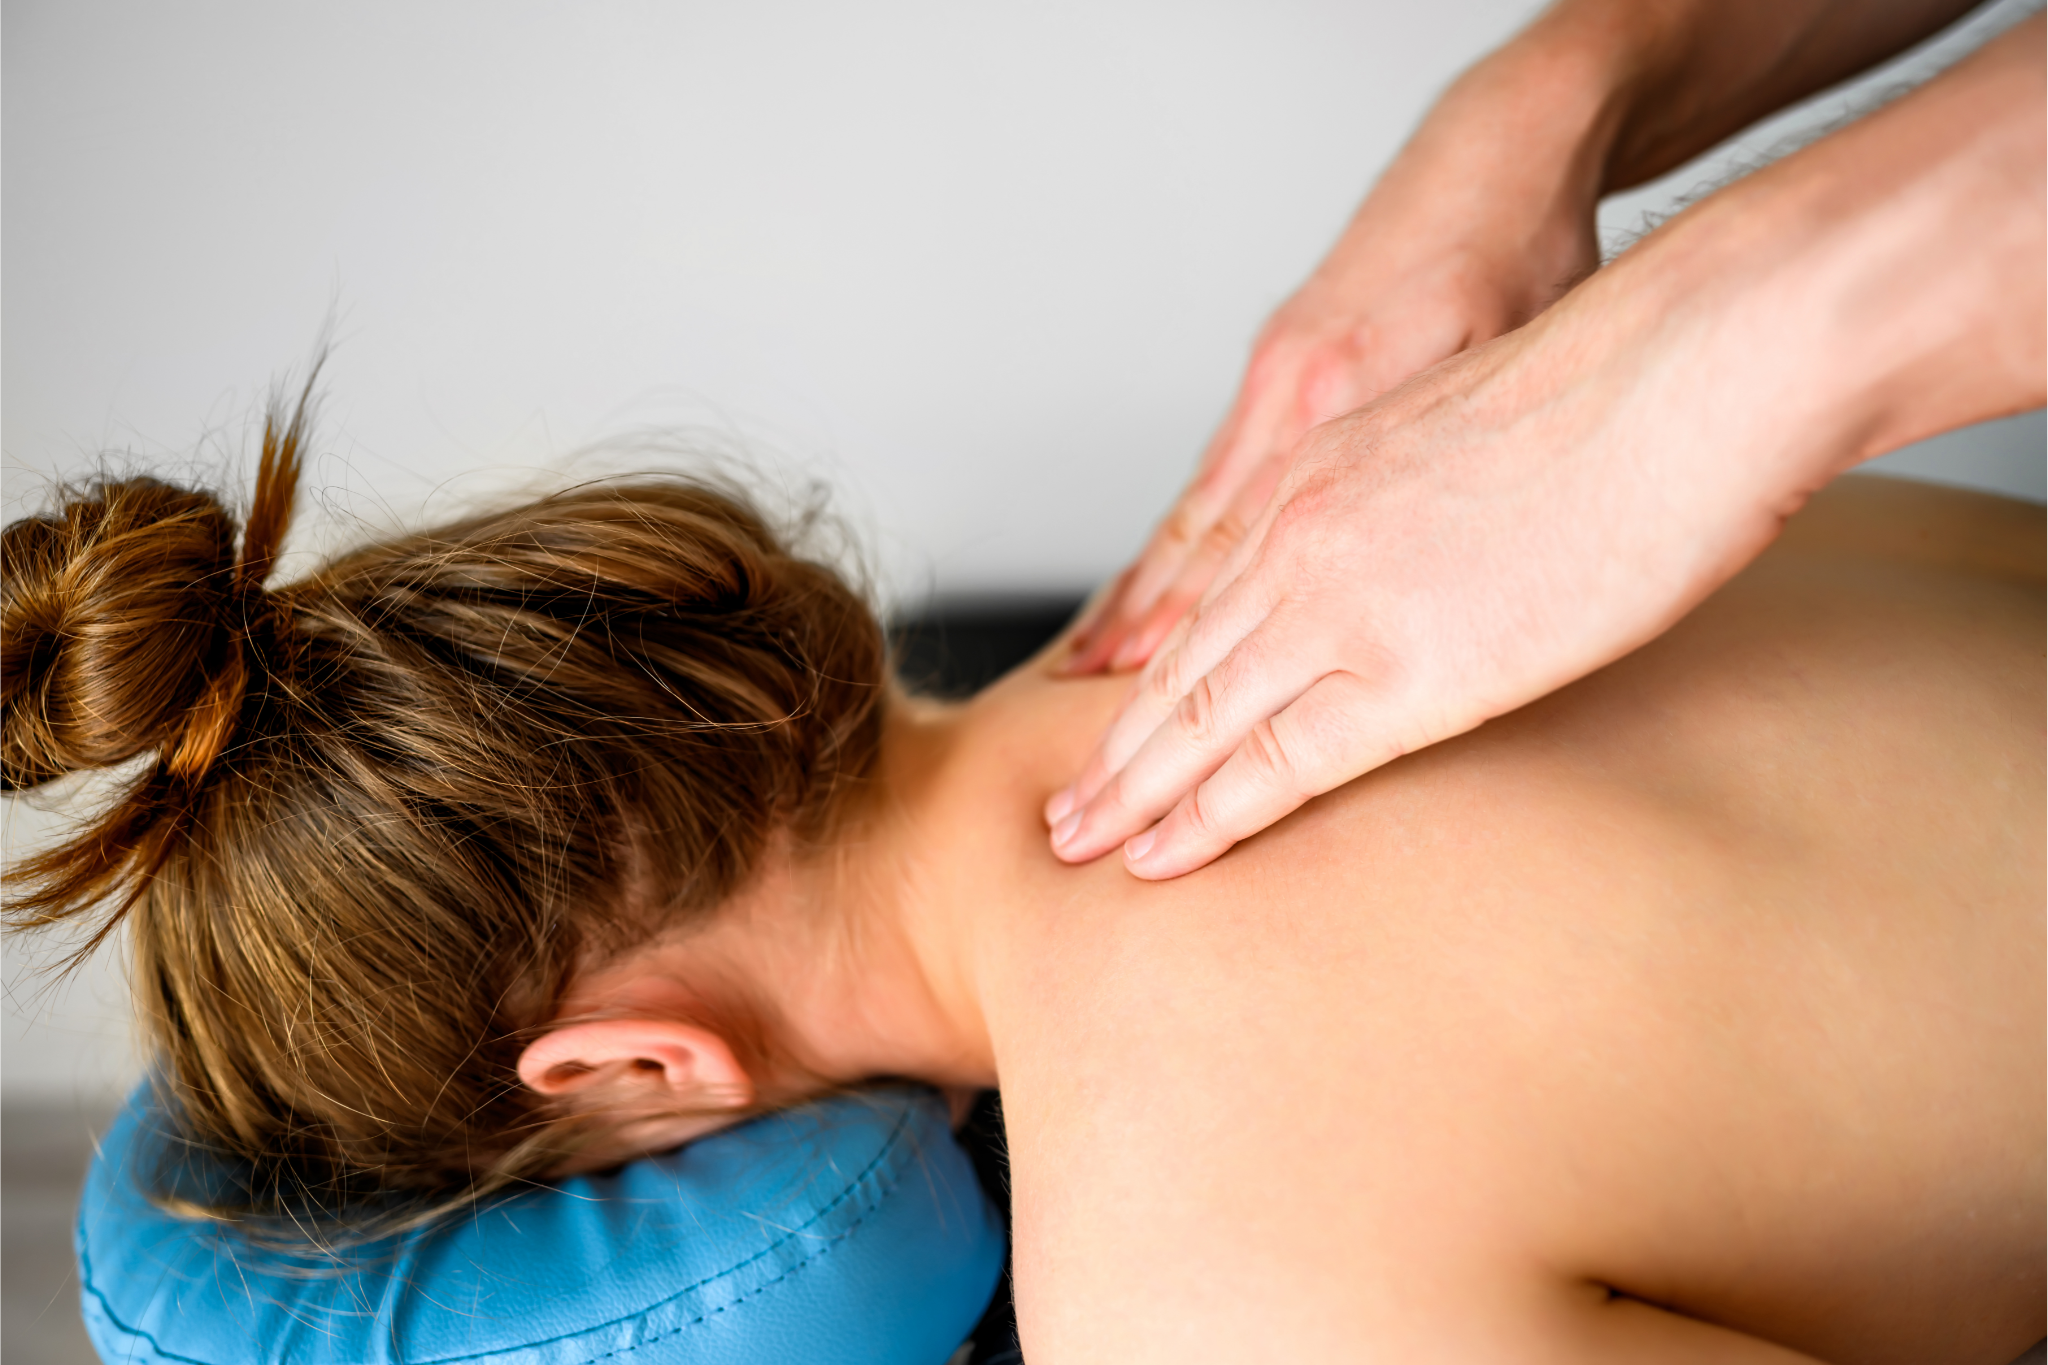 Girl during neck and shoulders massage in spa salon. Masseur hands doing care body therapy procedure for young woman wellness and relaxation.